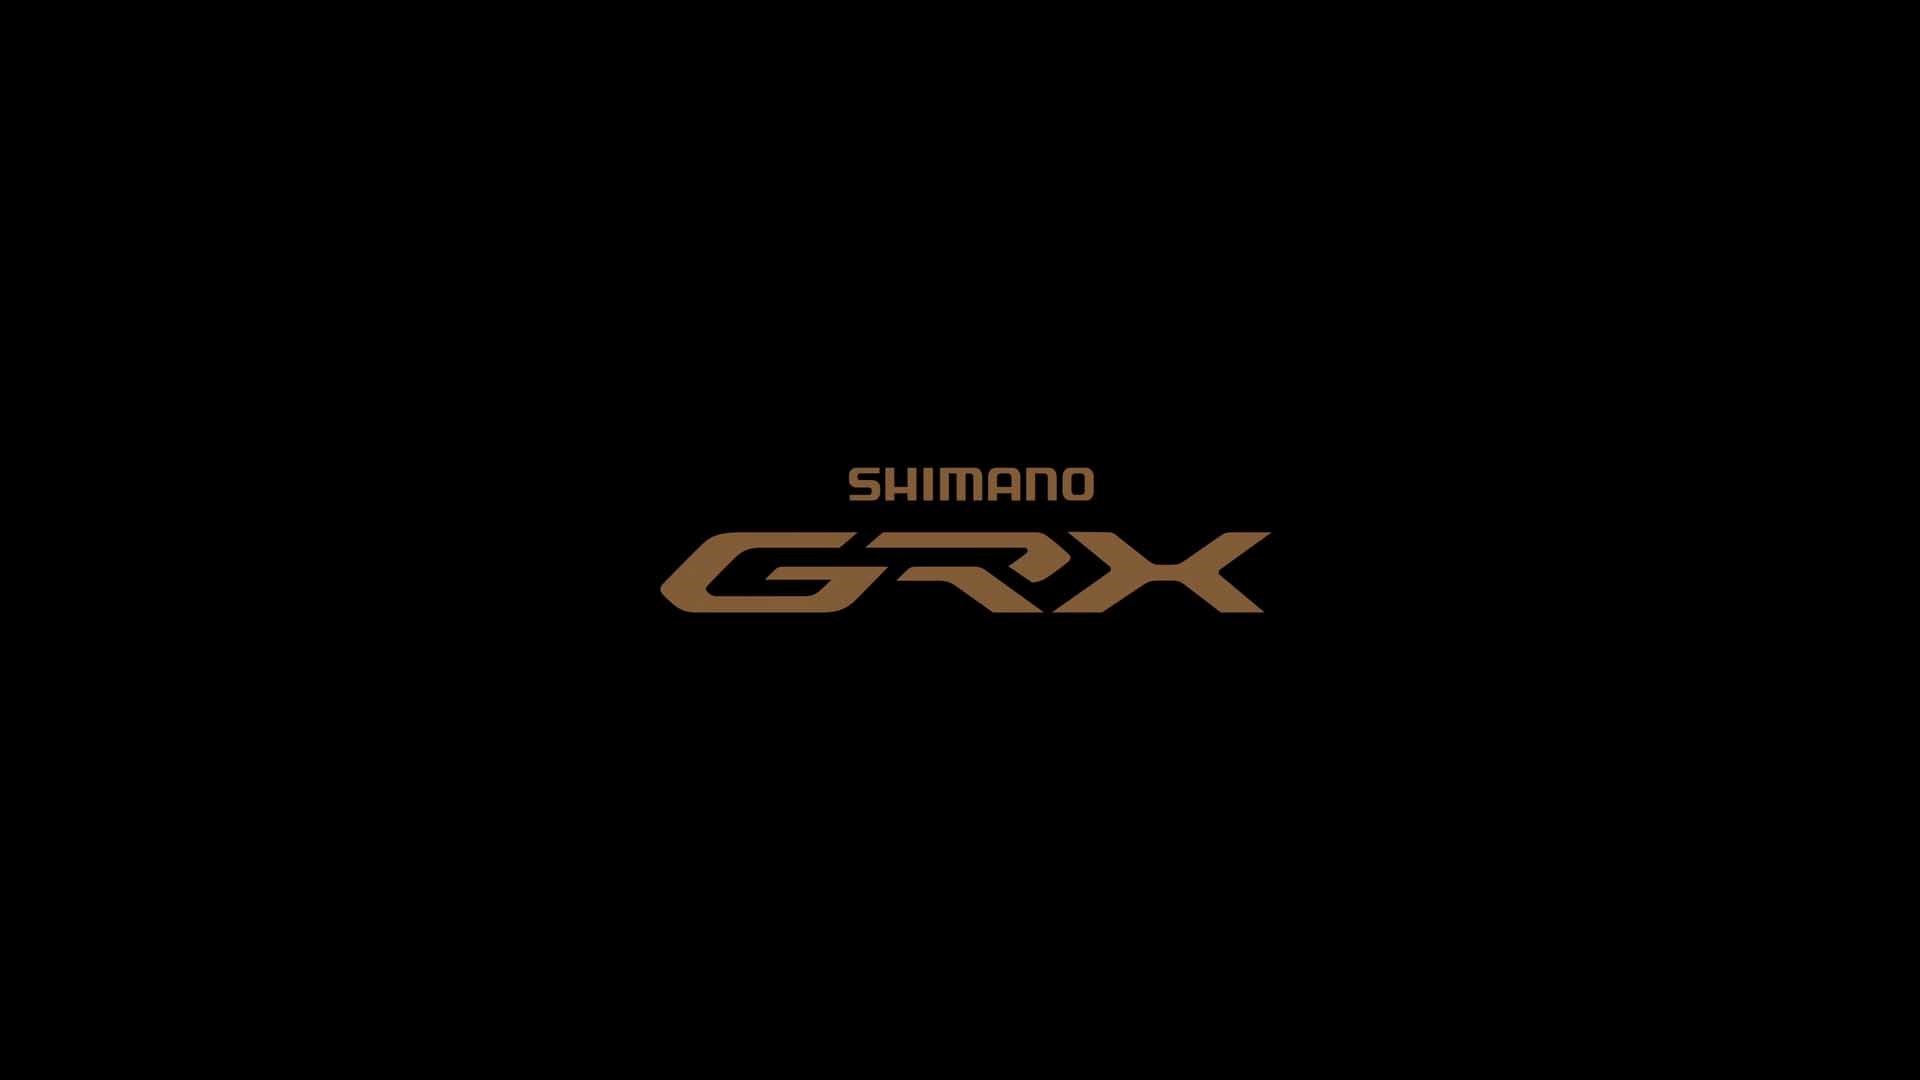 Explore Beyond with GRX Gravel components | SHIMANO